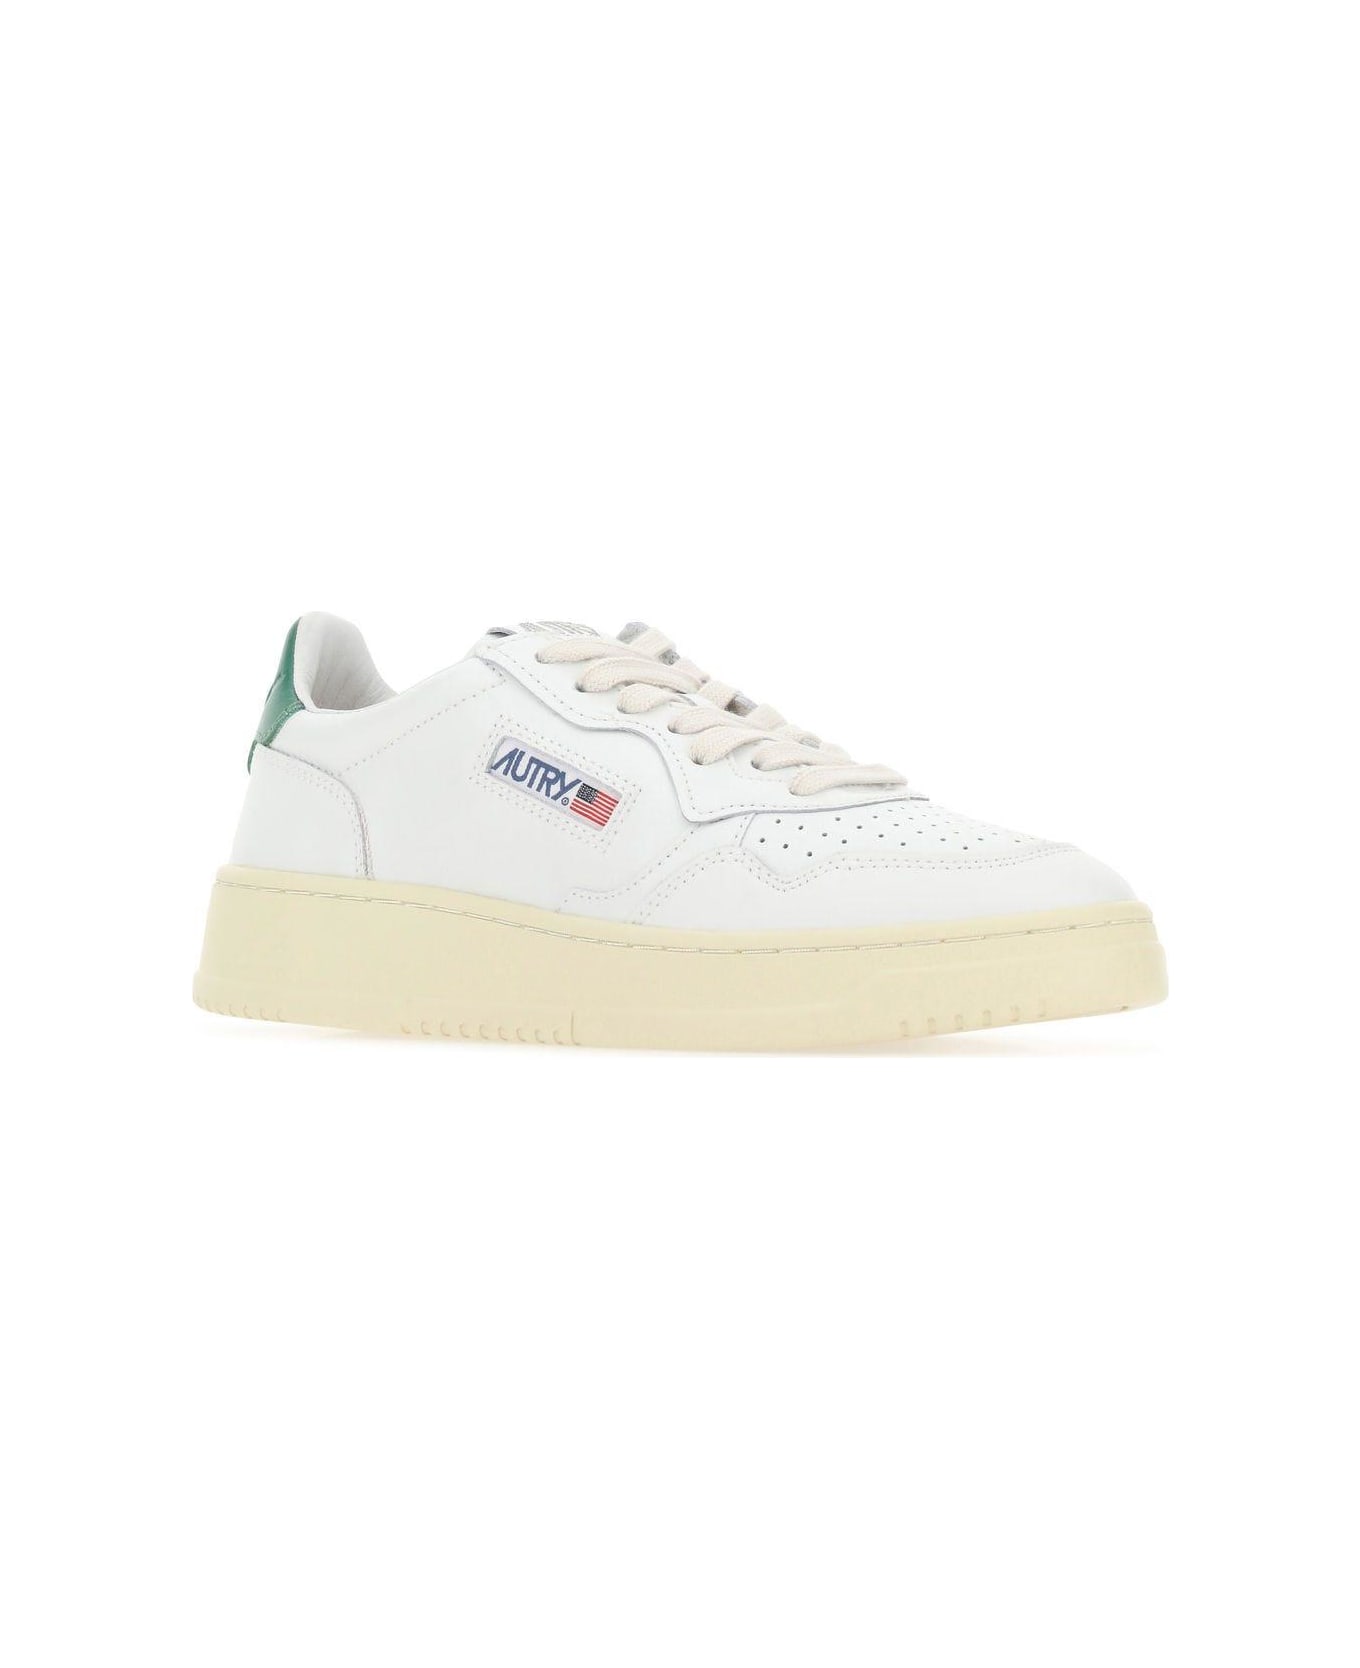 Autry White Leather Medalist Sneakers - WHITE